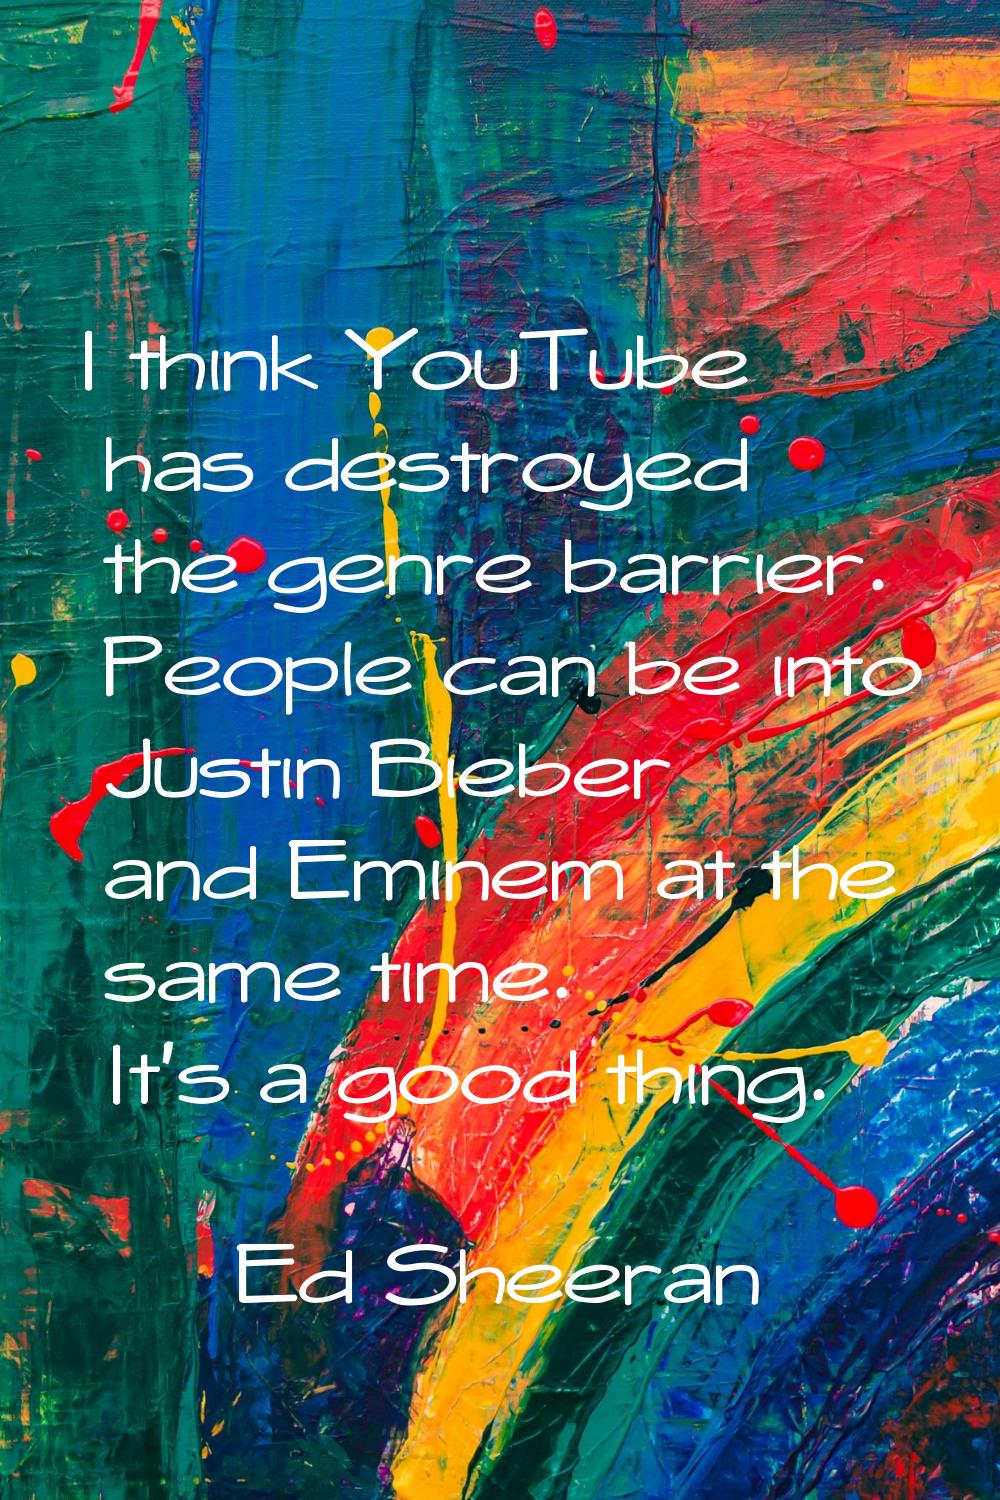 I think YouTube has destroyed the genre barrier. People can be into Justin Bieber and Eminem at the